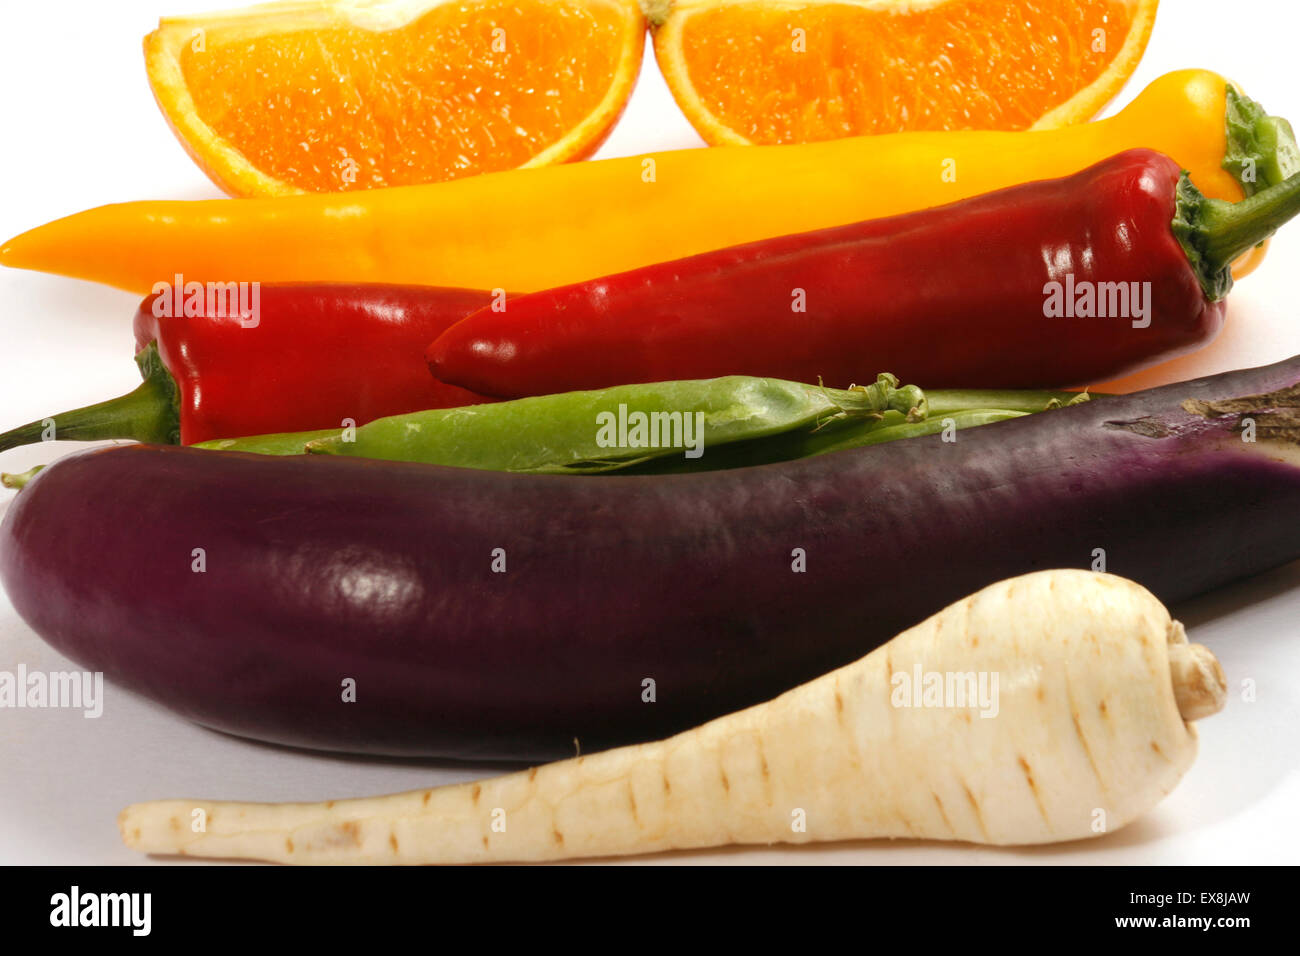 Rainbow Fruit and Vegetables Stock Photo